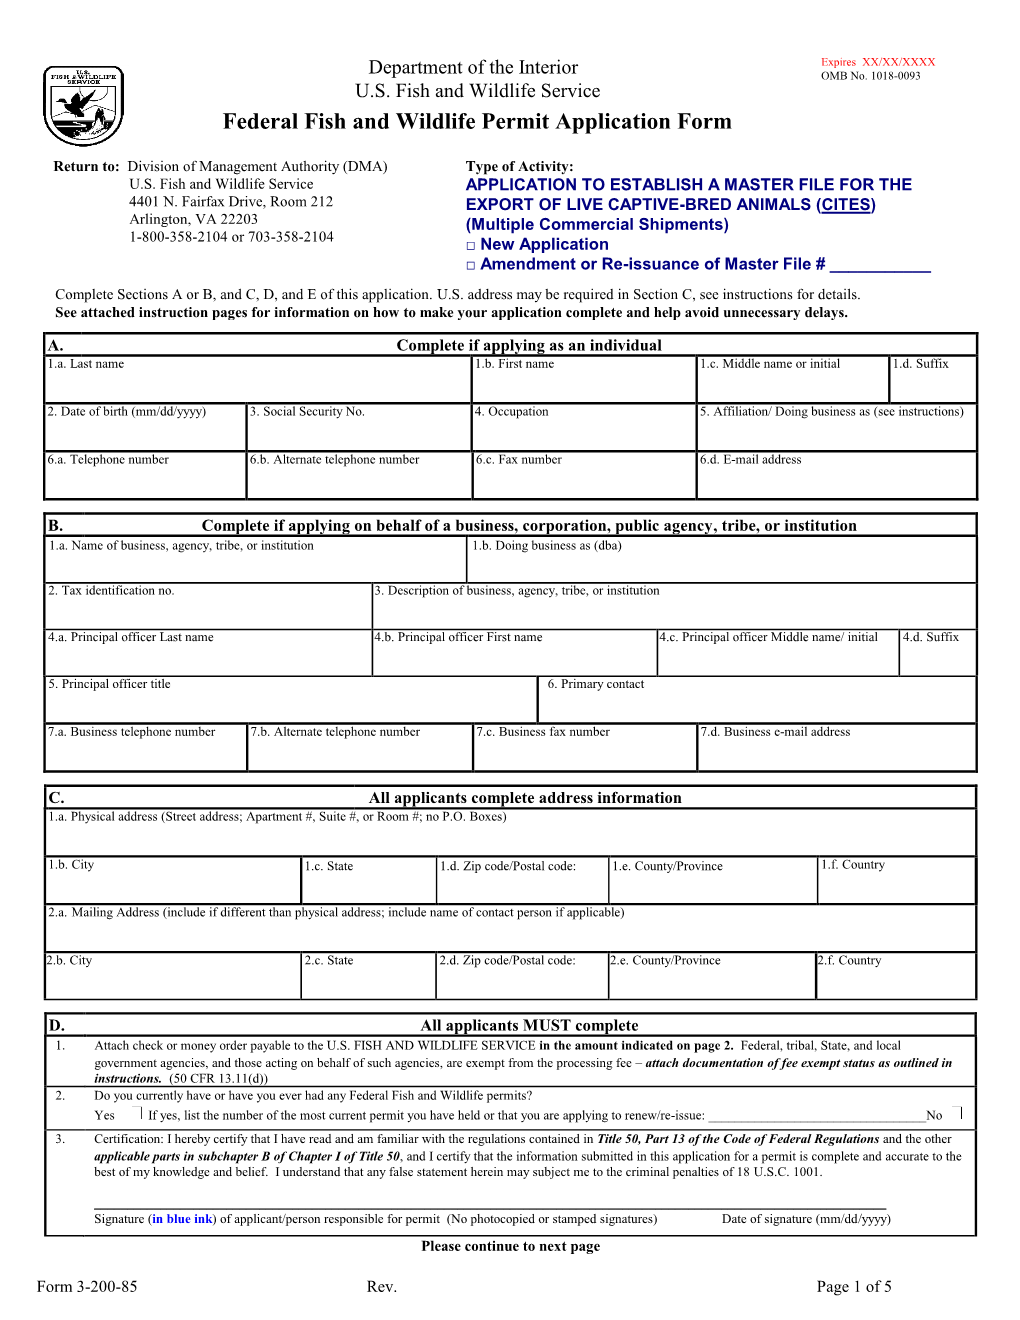 Federal Fish and Wildlife Permit Application Form